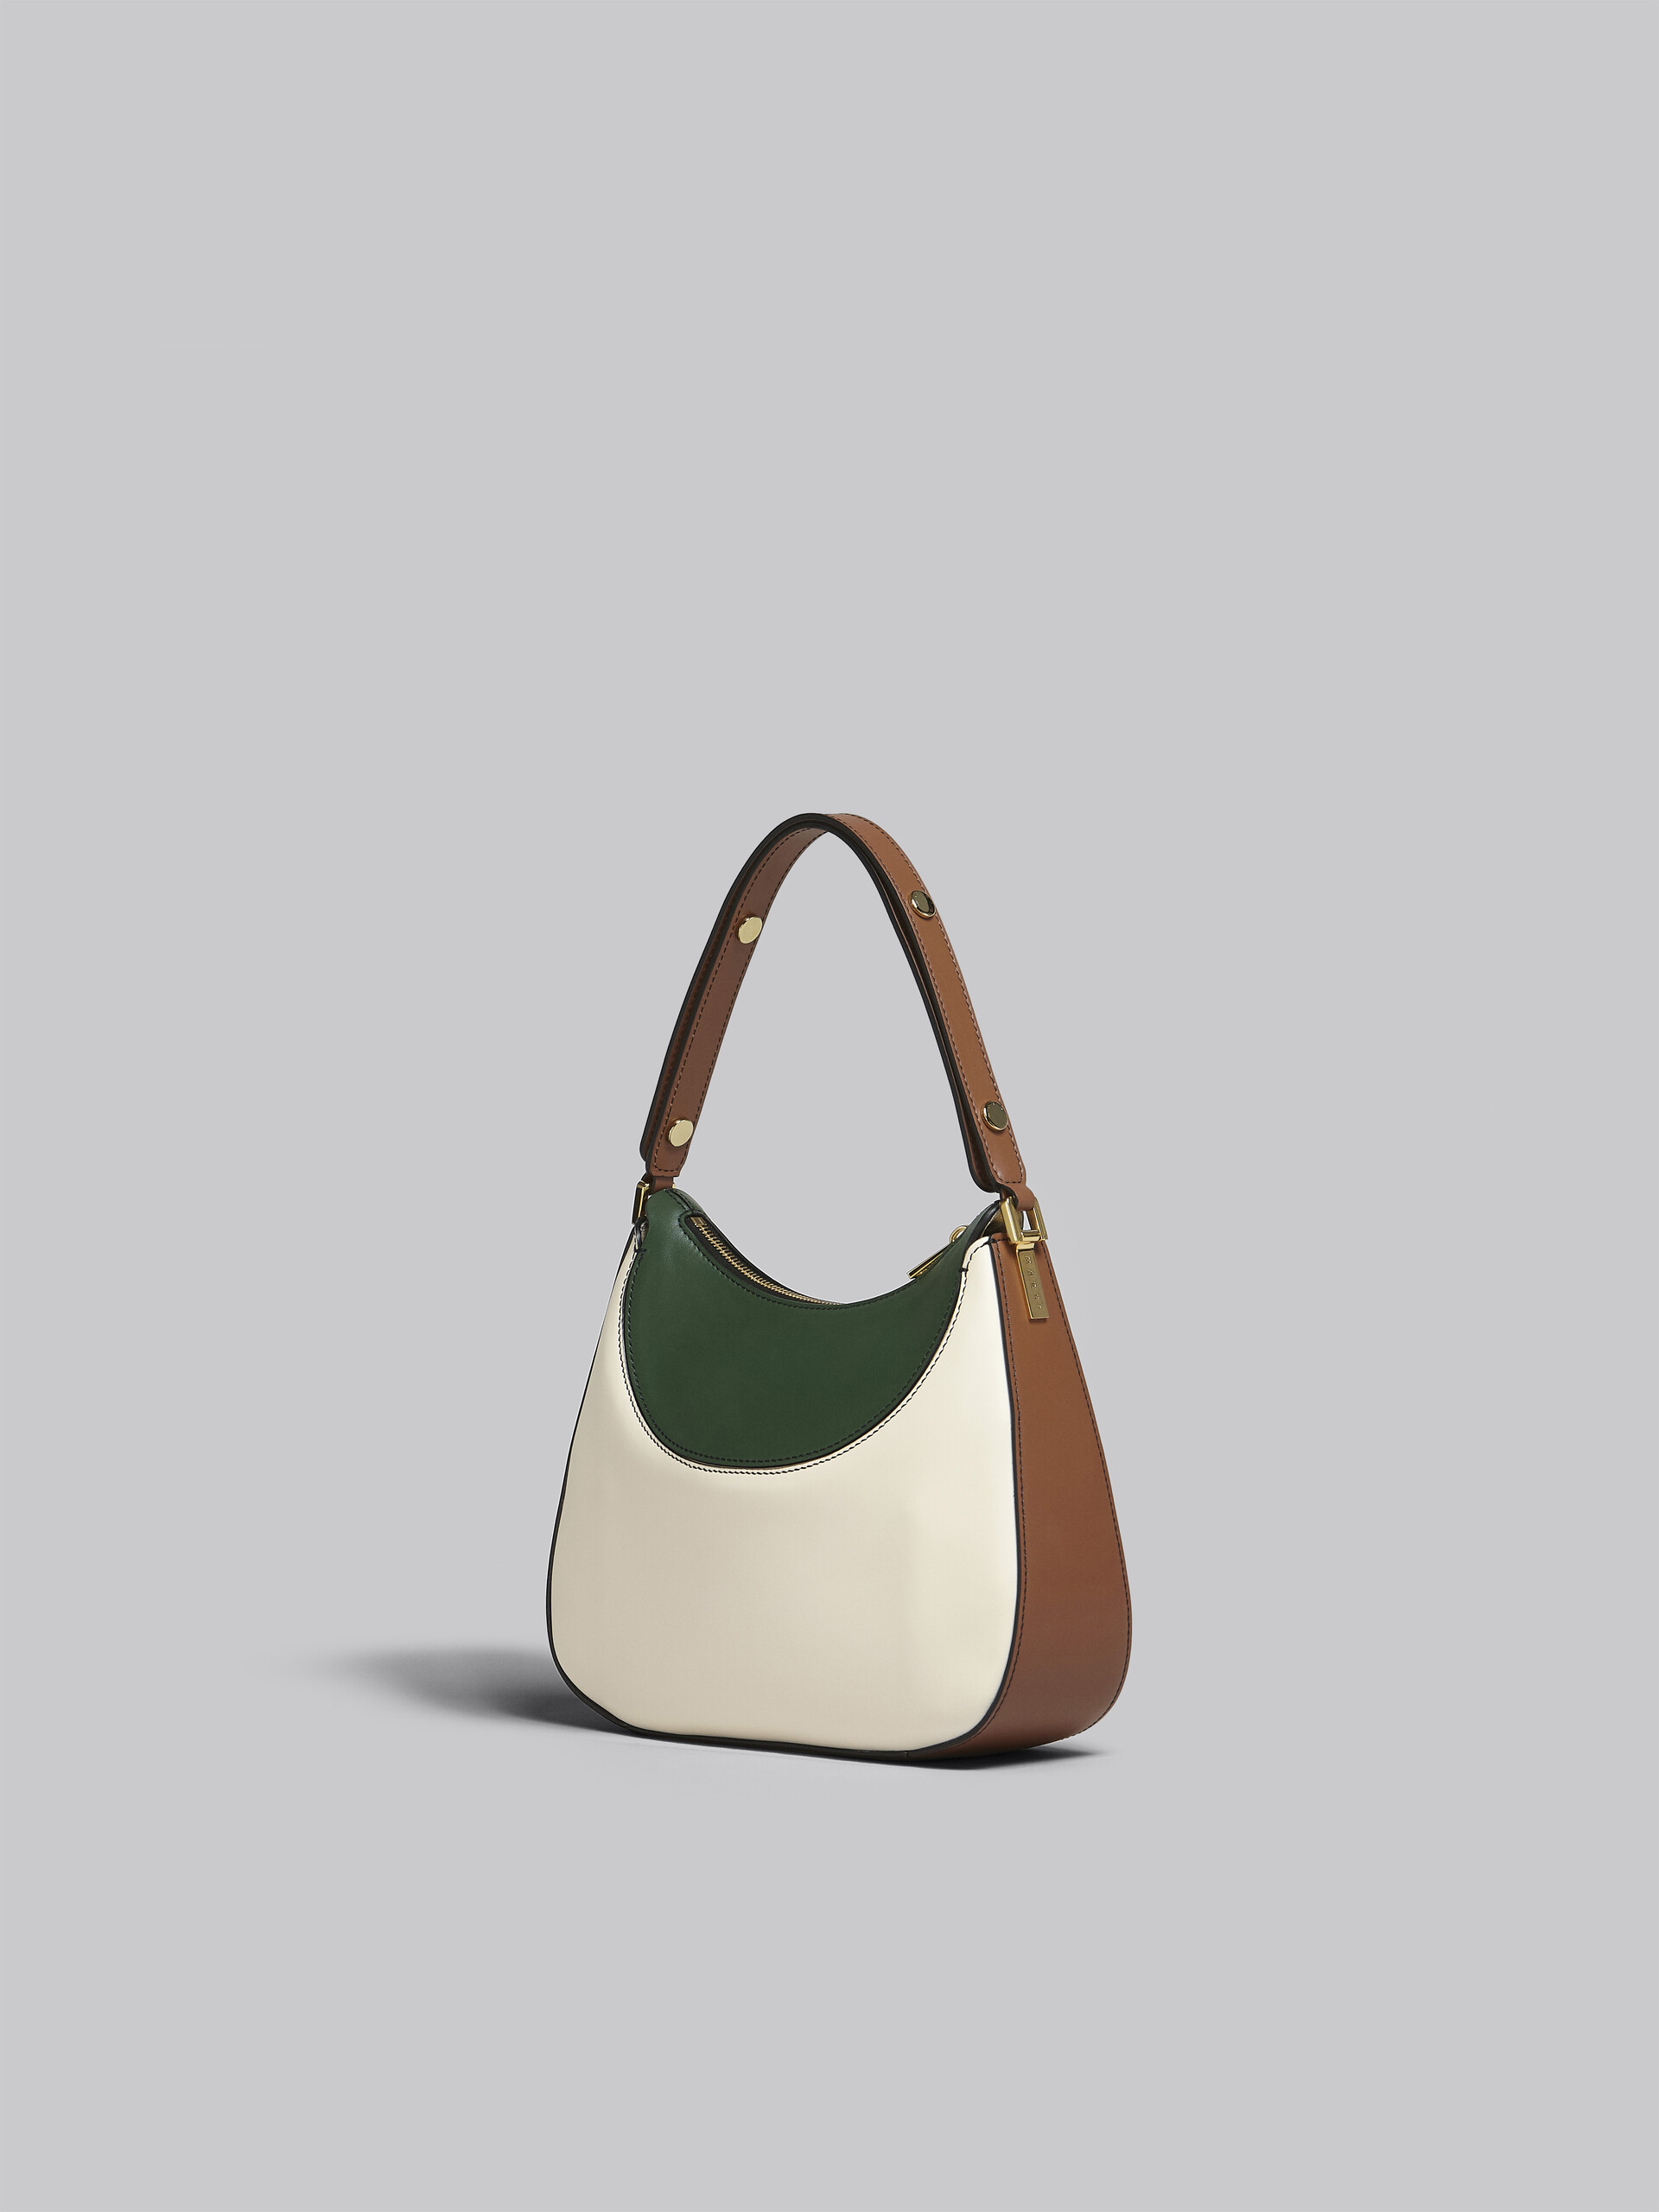 Milano small bag in white brown and green leather - Handbag - Image 3